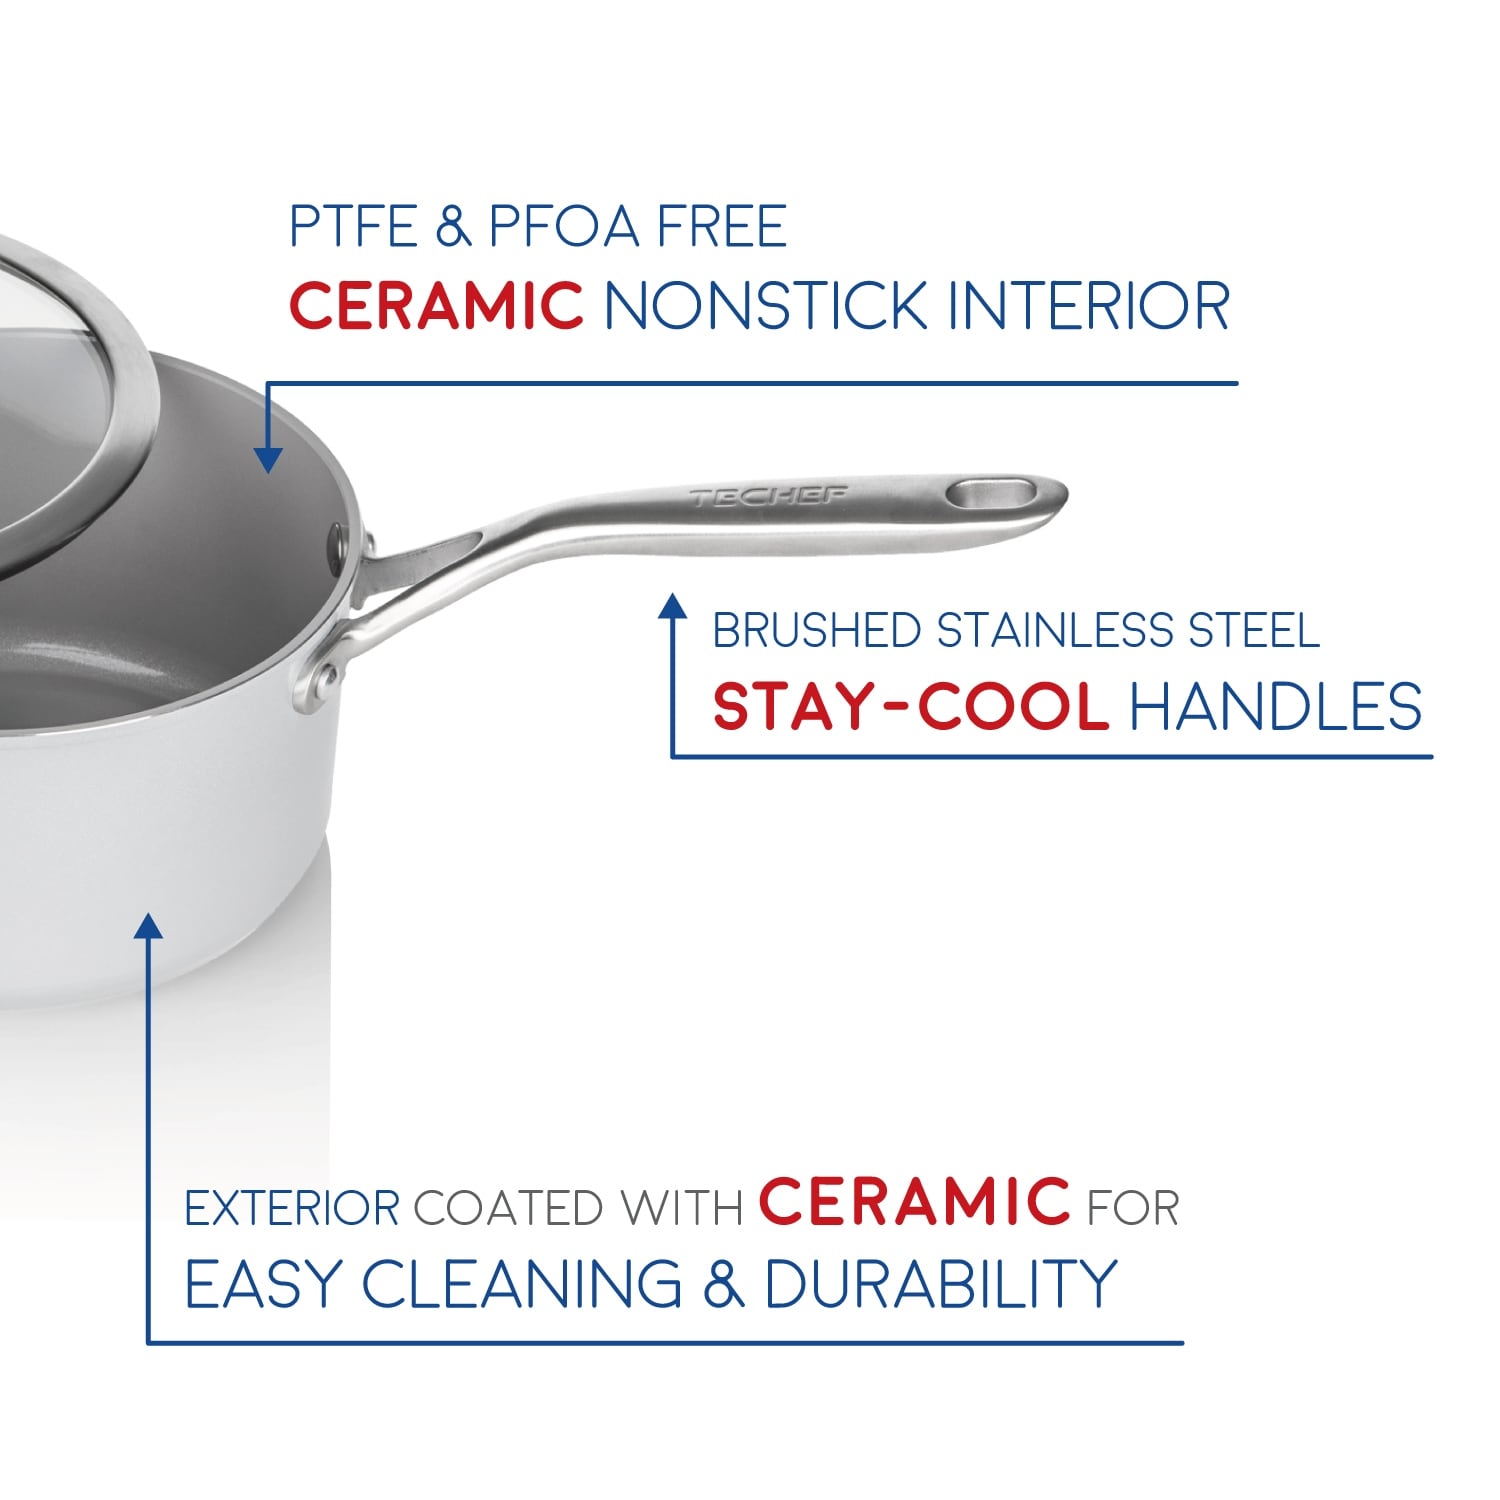 CeraTerra Frying Pan with Lid